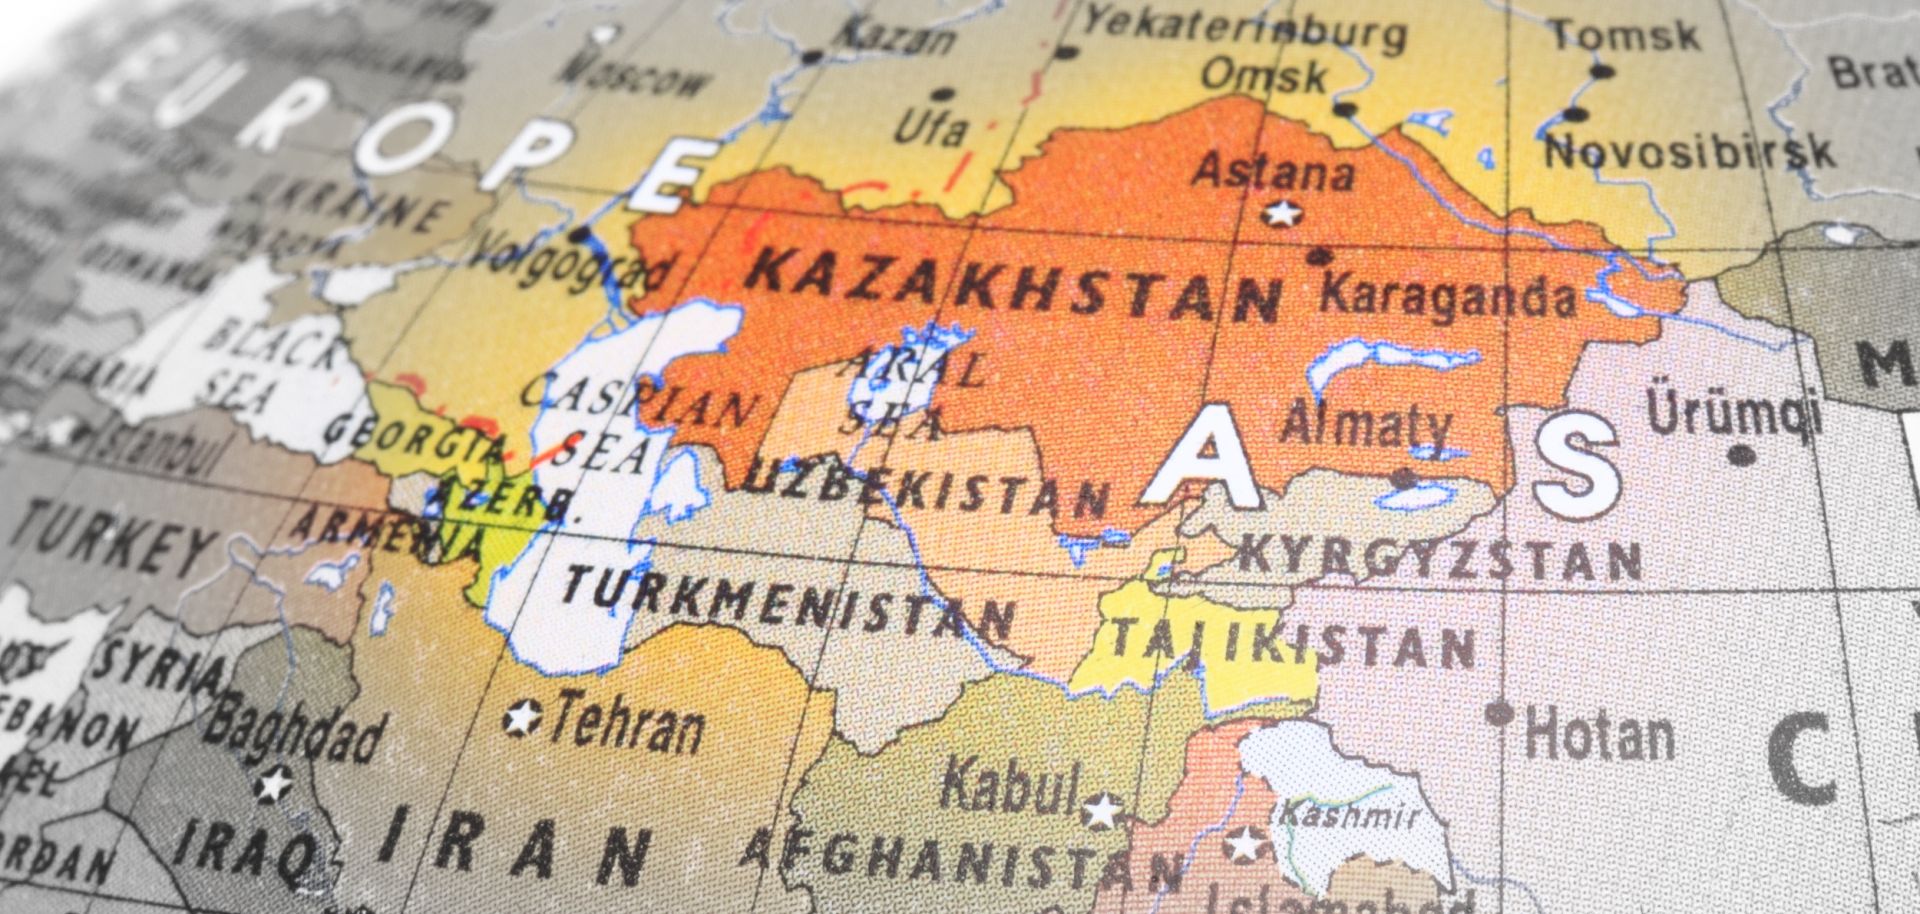 The question now is, have political transitions in Central Asia -- and the political systems of these countries in general -- stabilized and entered into a new, less volatile normal? The answer is more complex than the seemingly smooth changes taking place appear.